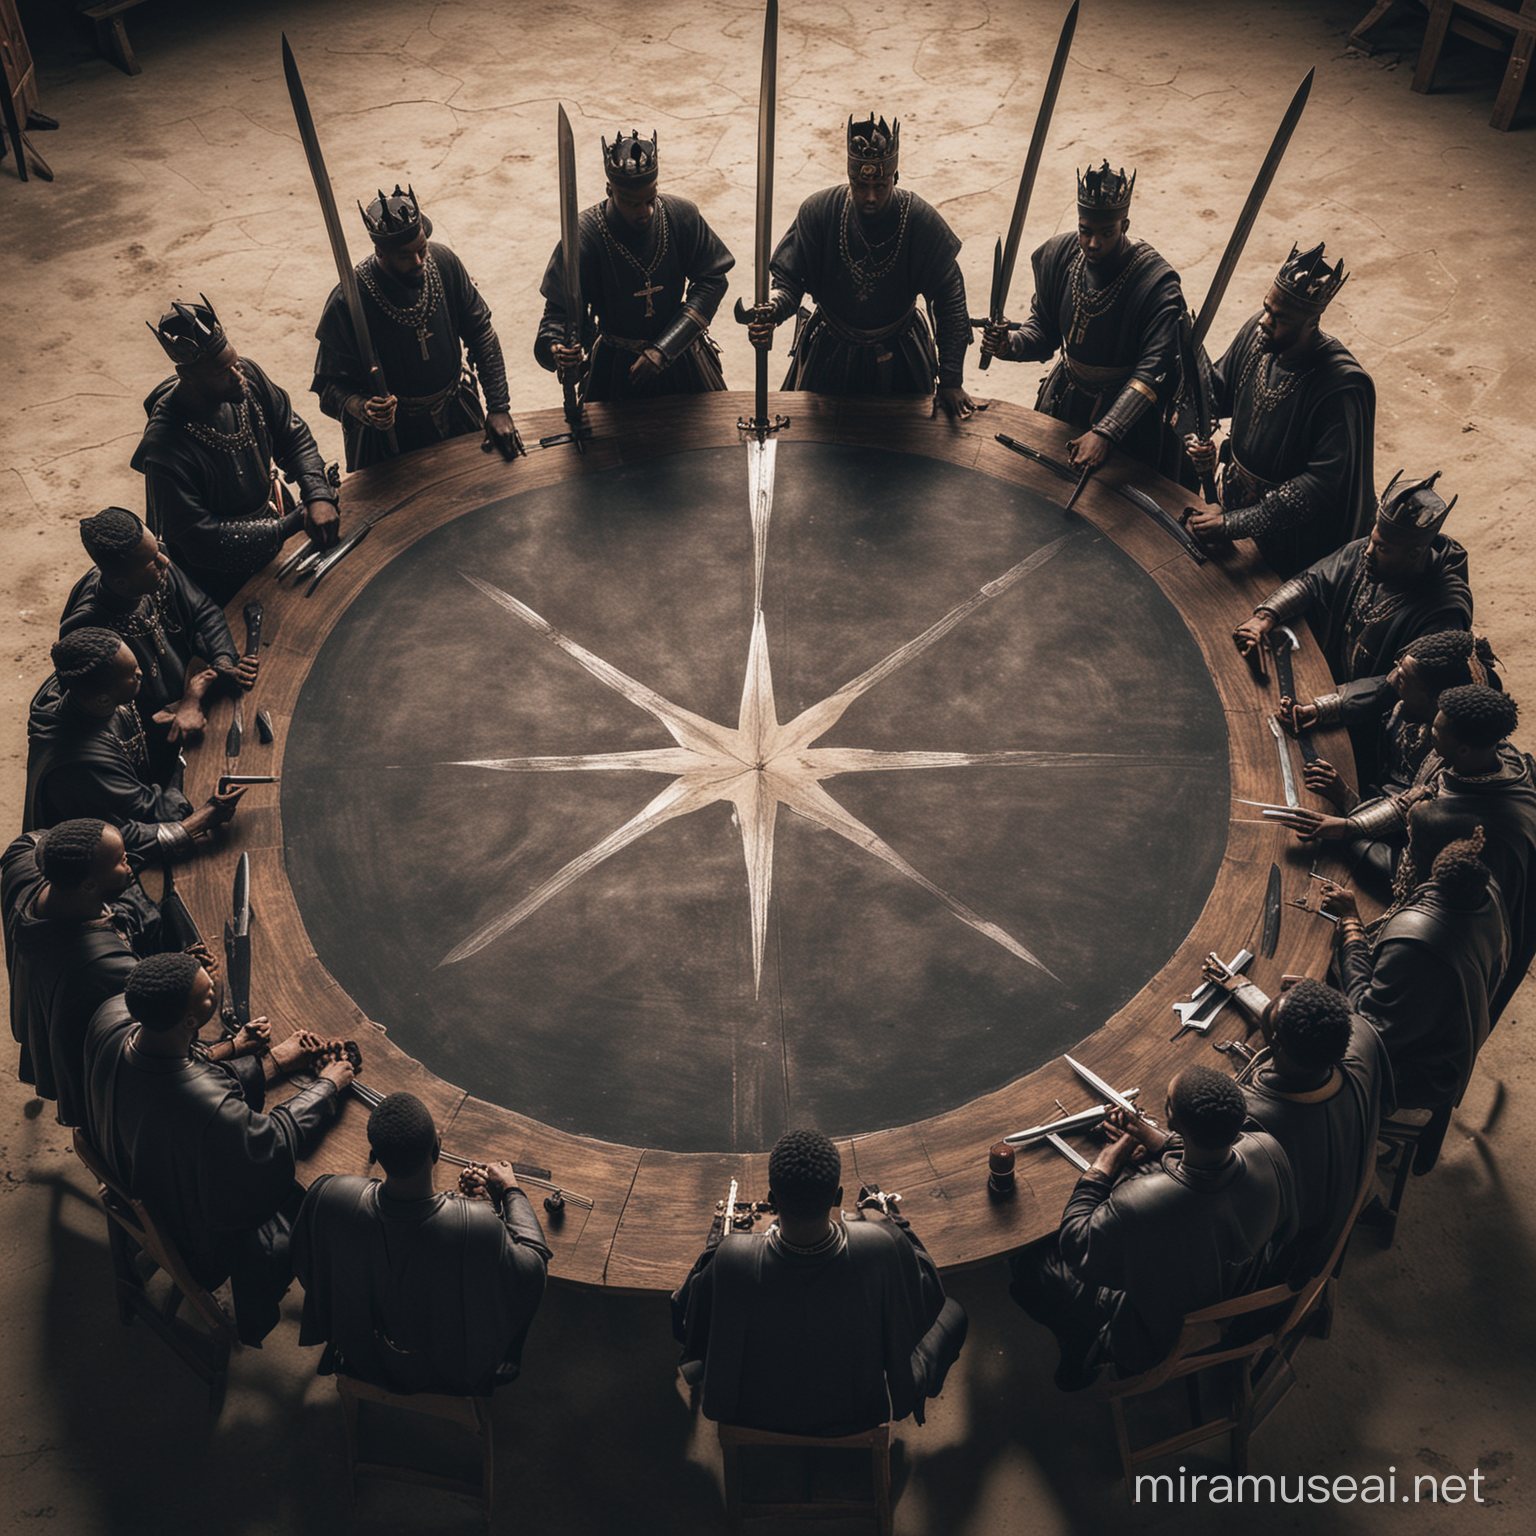 Royal Black Kings Round Table Summit with Swords